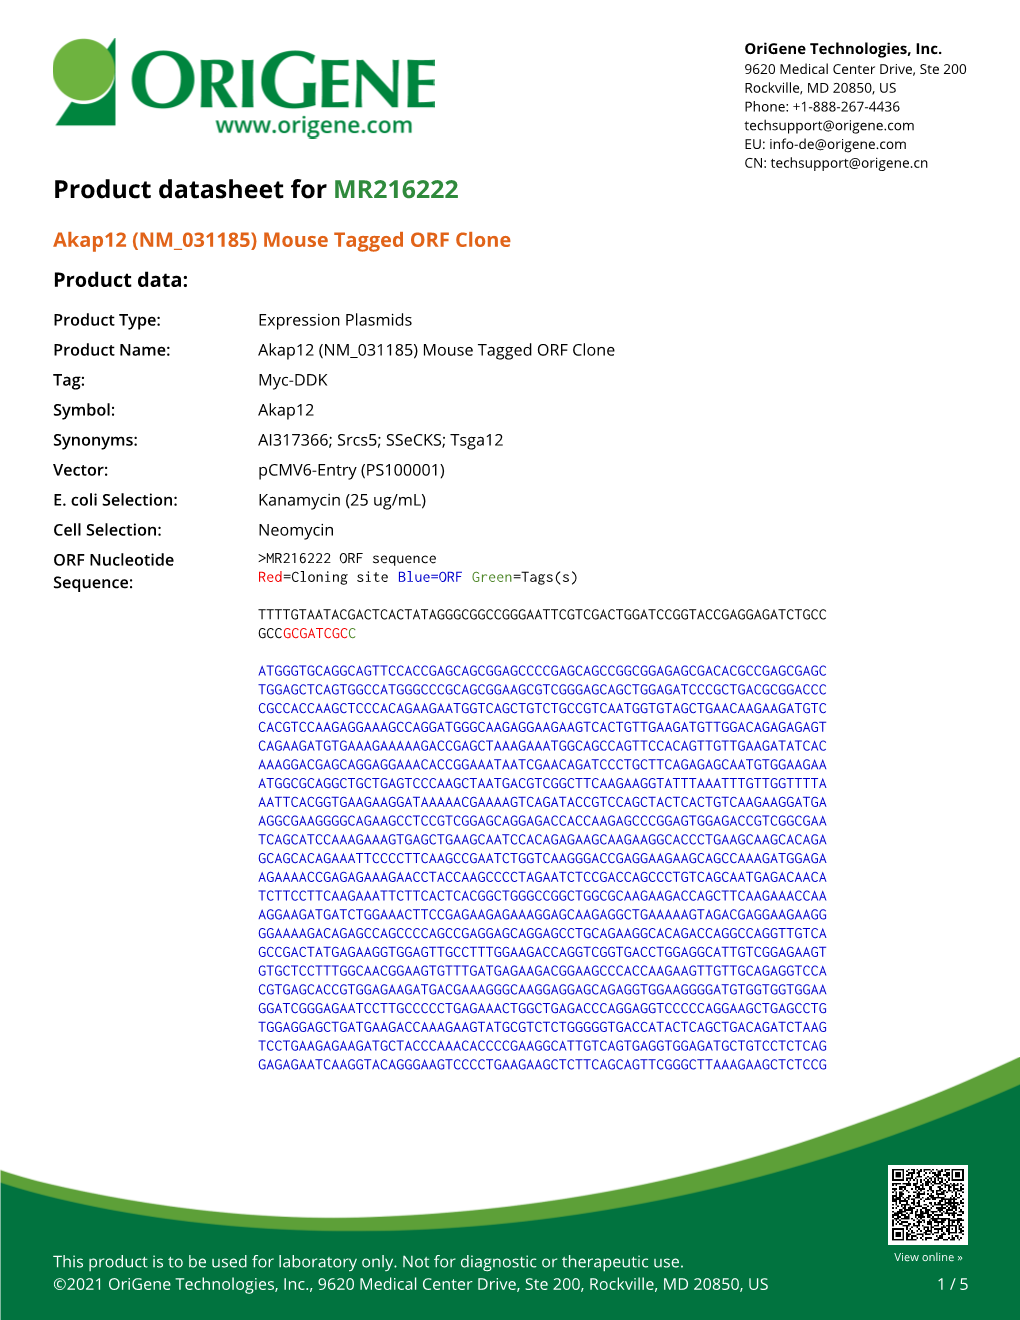 Akap12 (NM 031185) Mouse Tagged ORF Clone Product Data